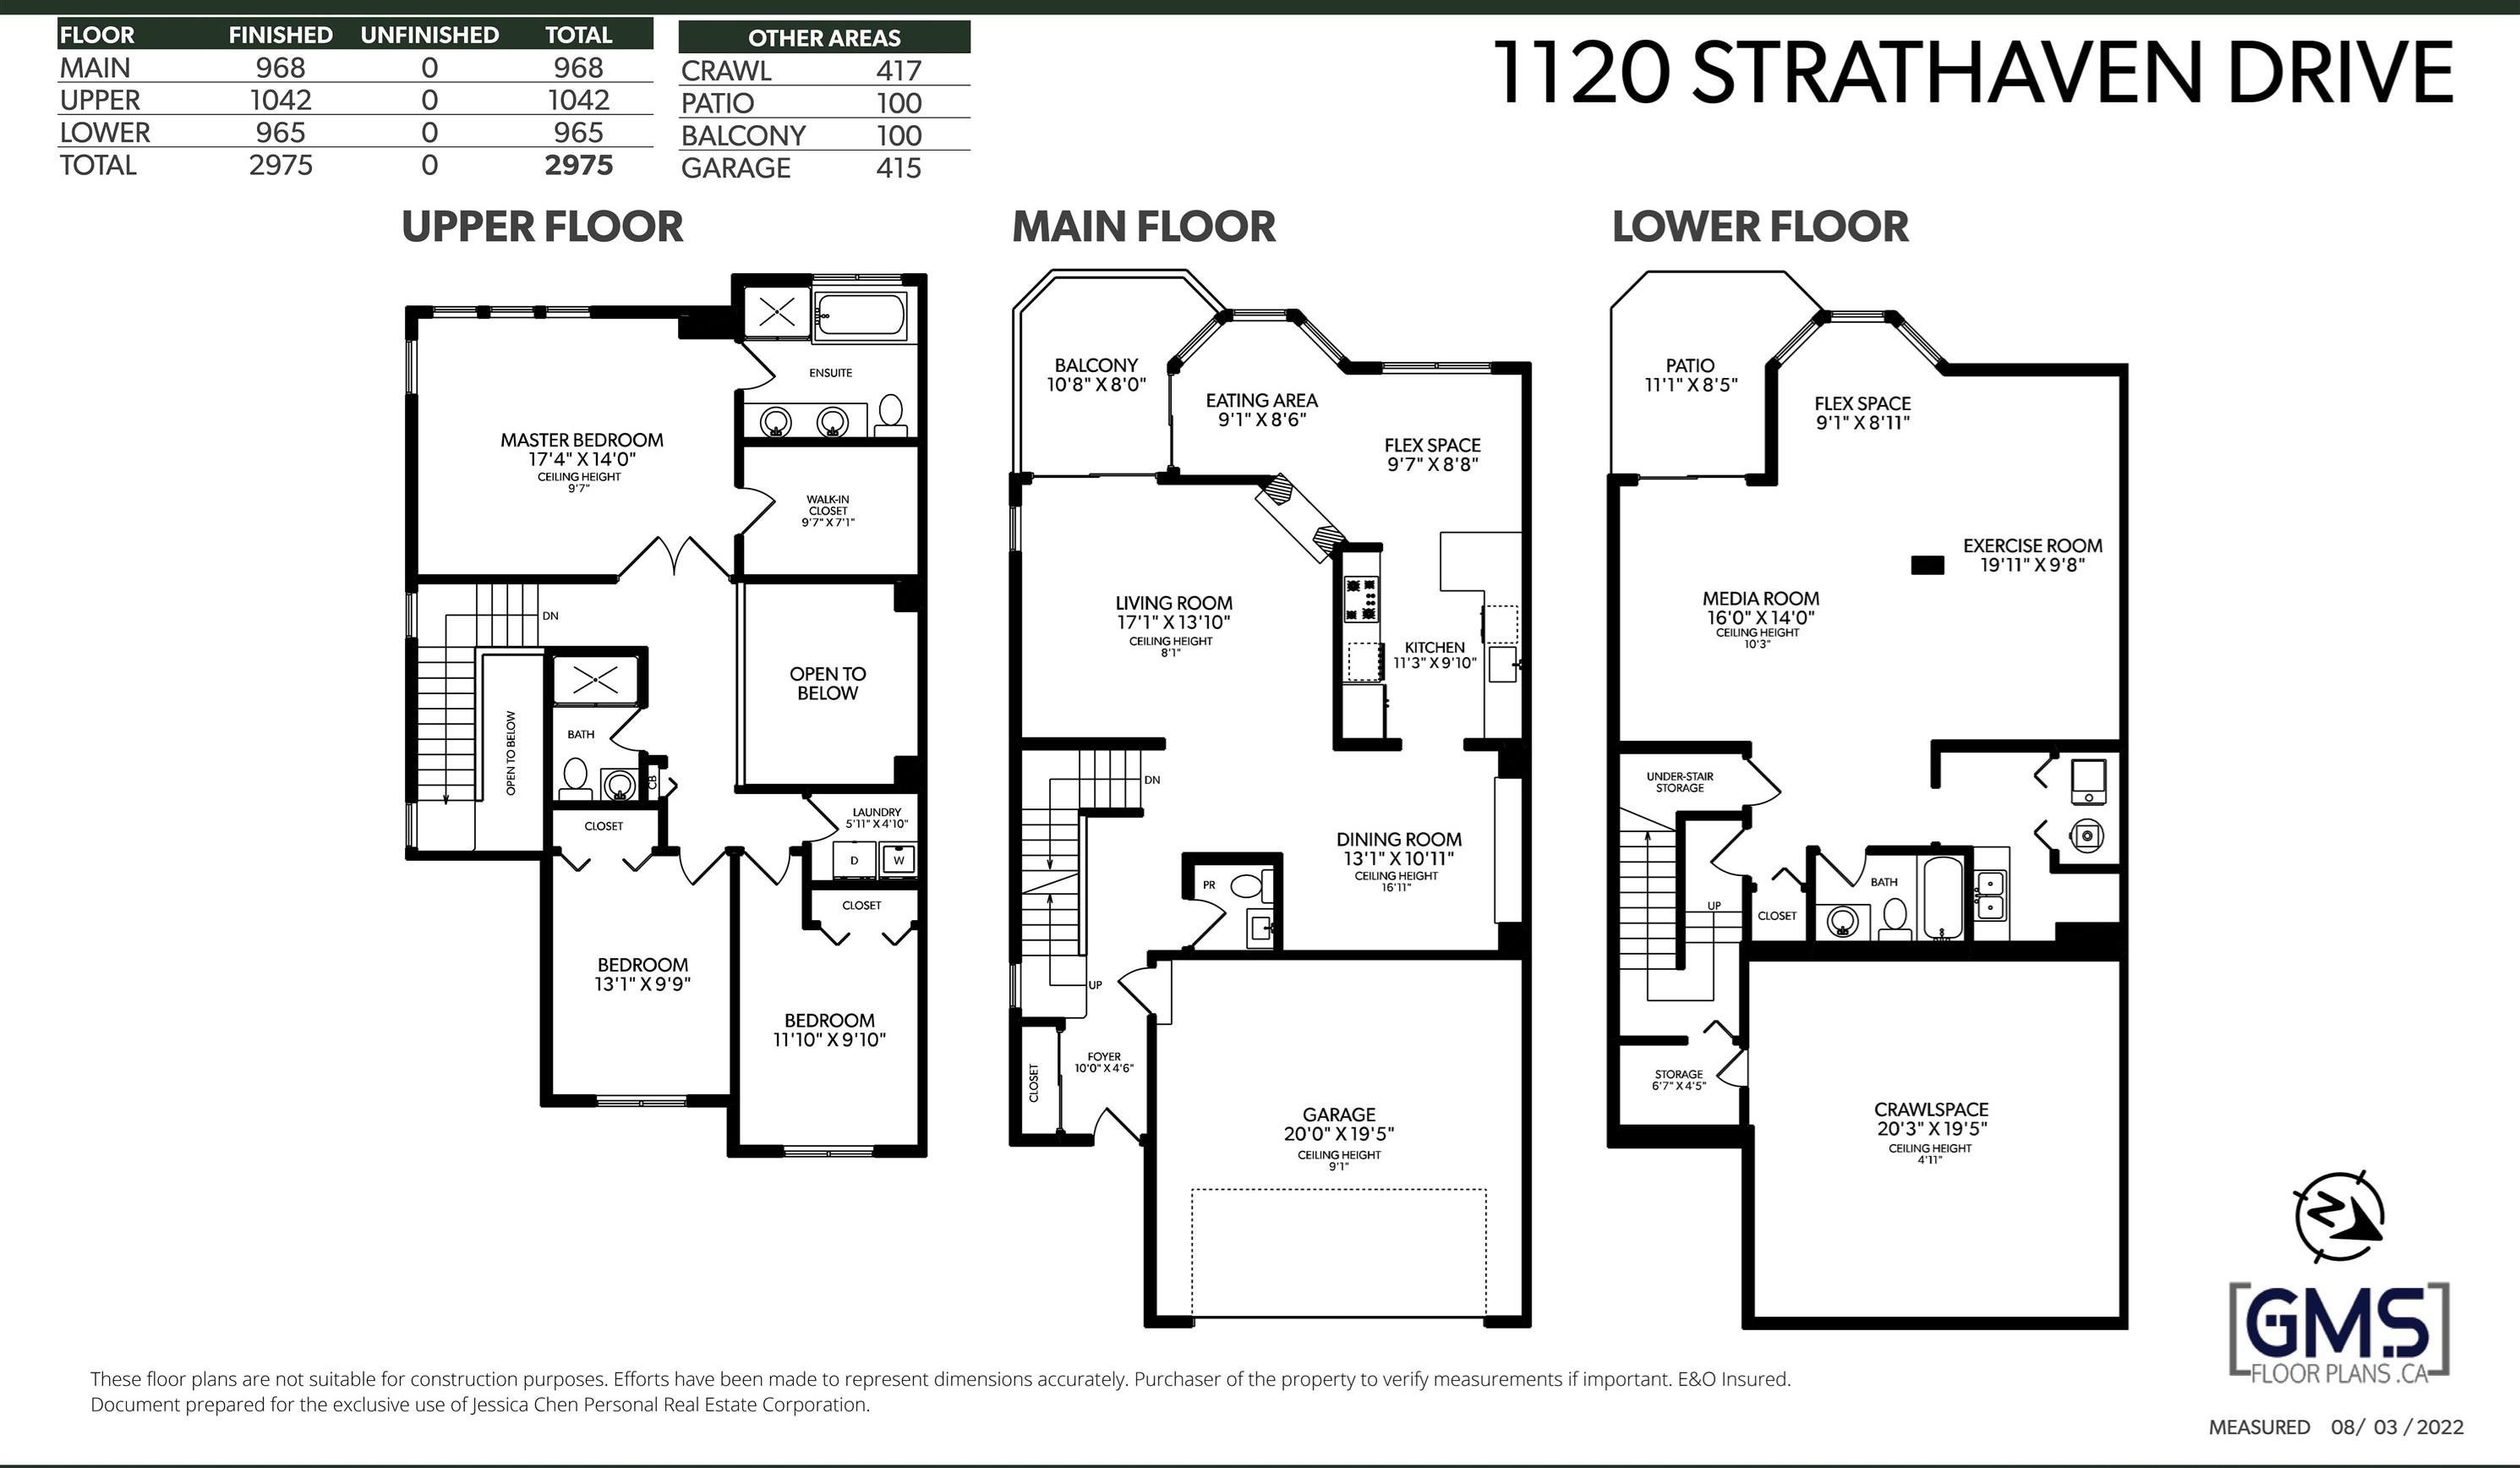 Listing image of 1120 STRATHAVEN DRIVE